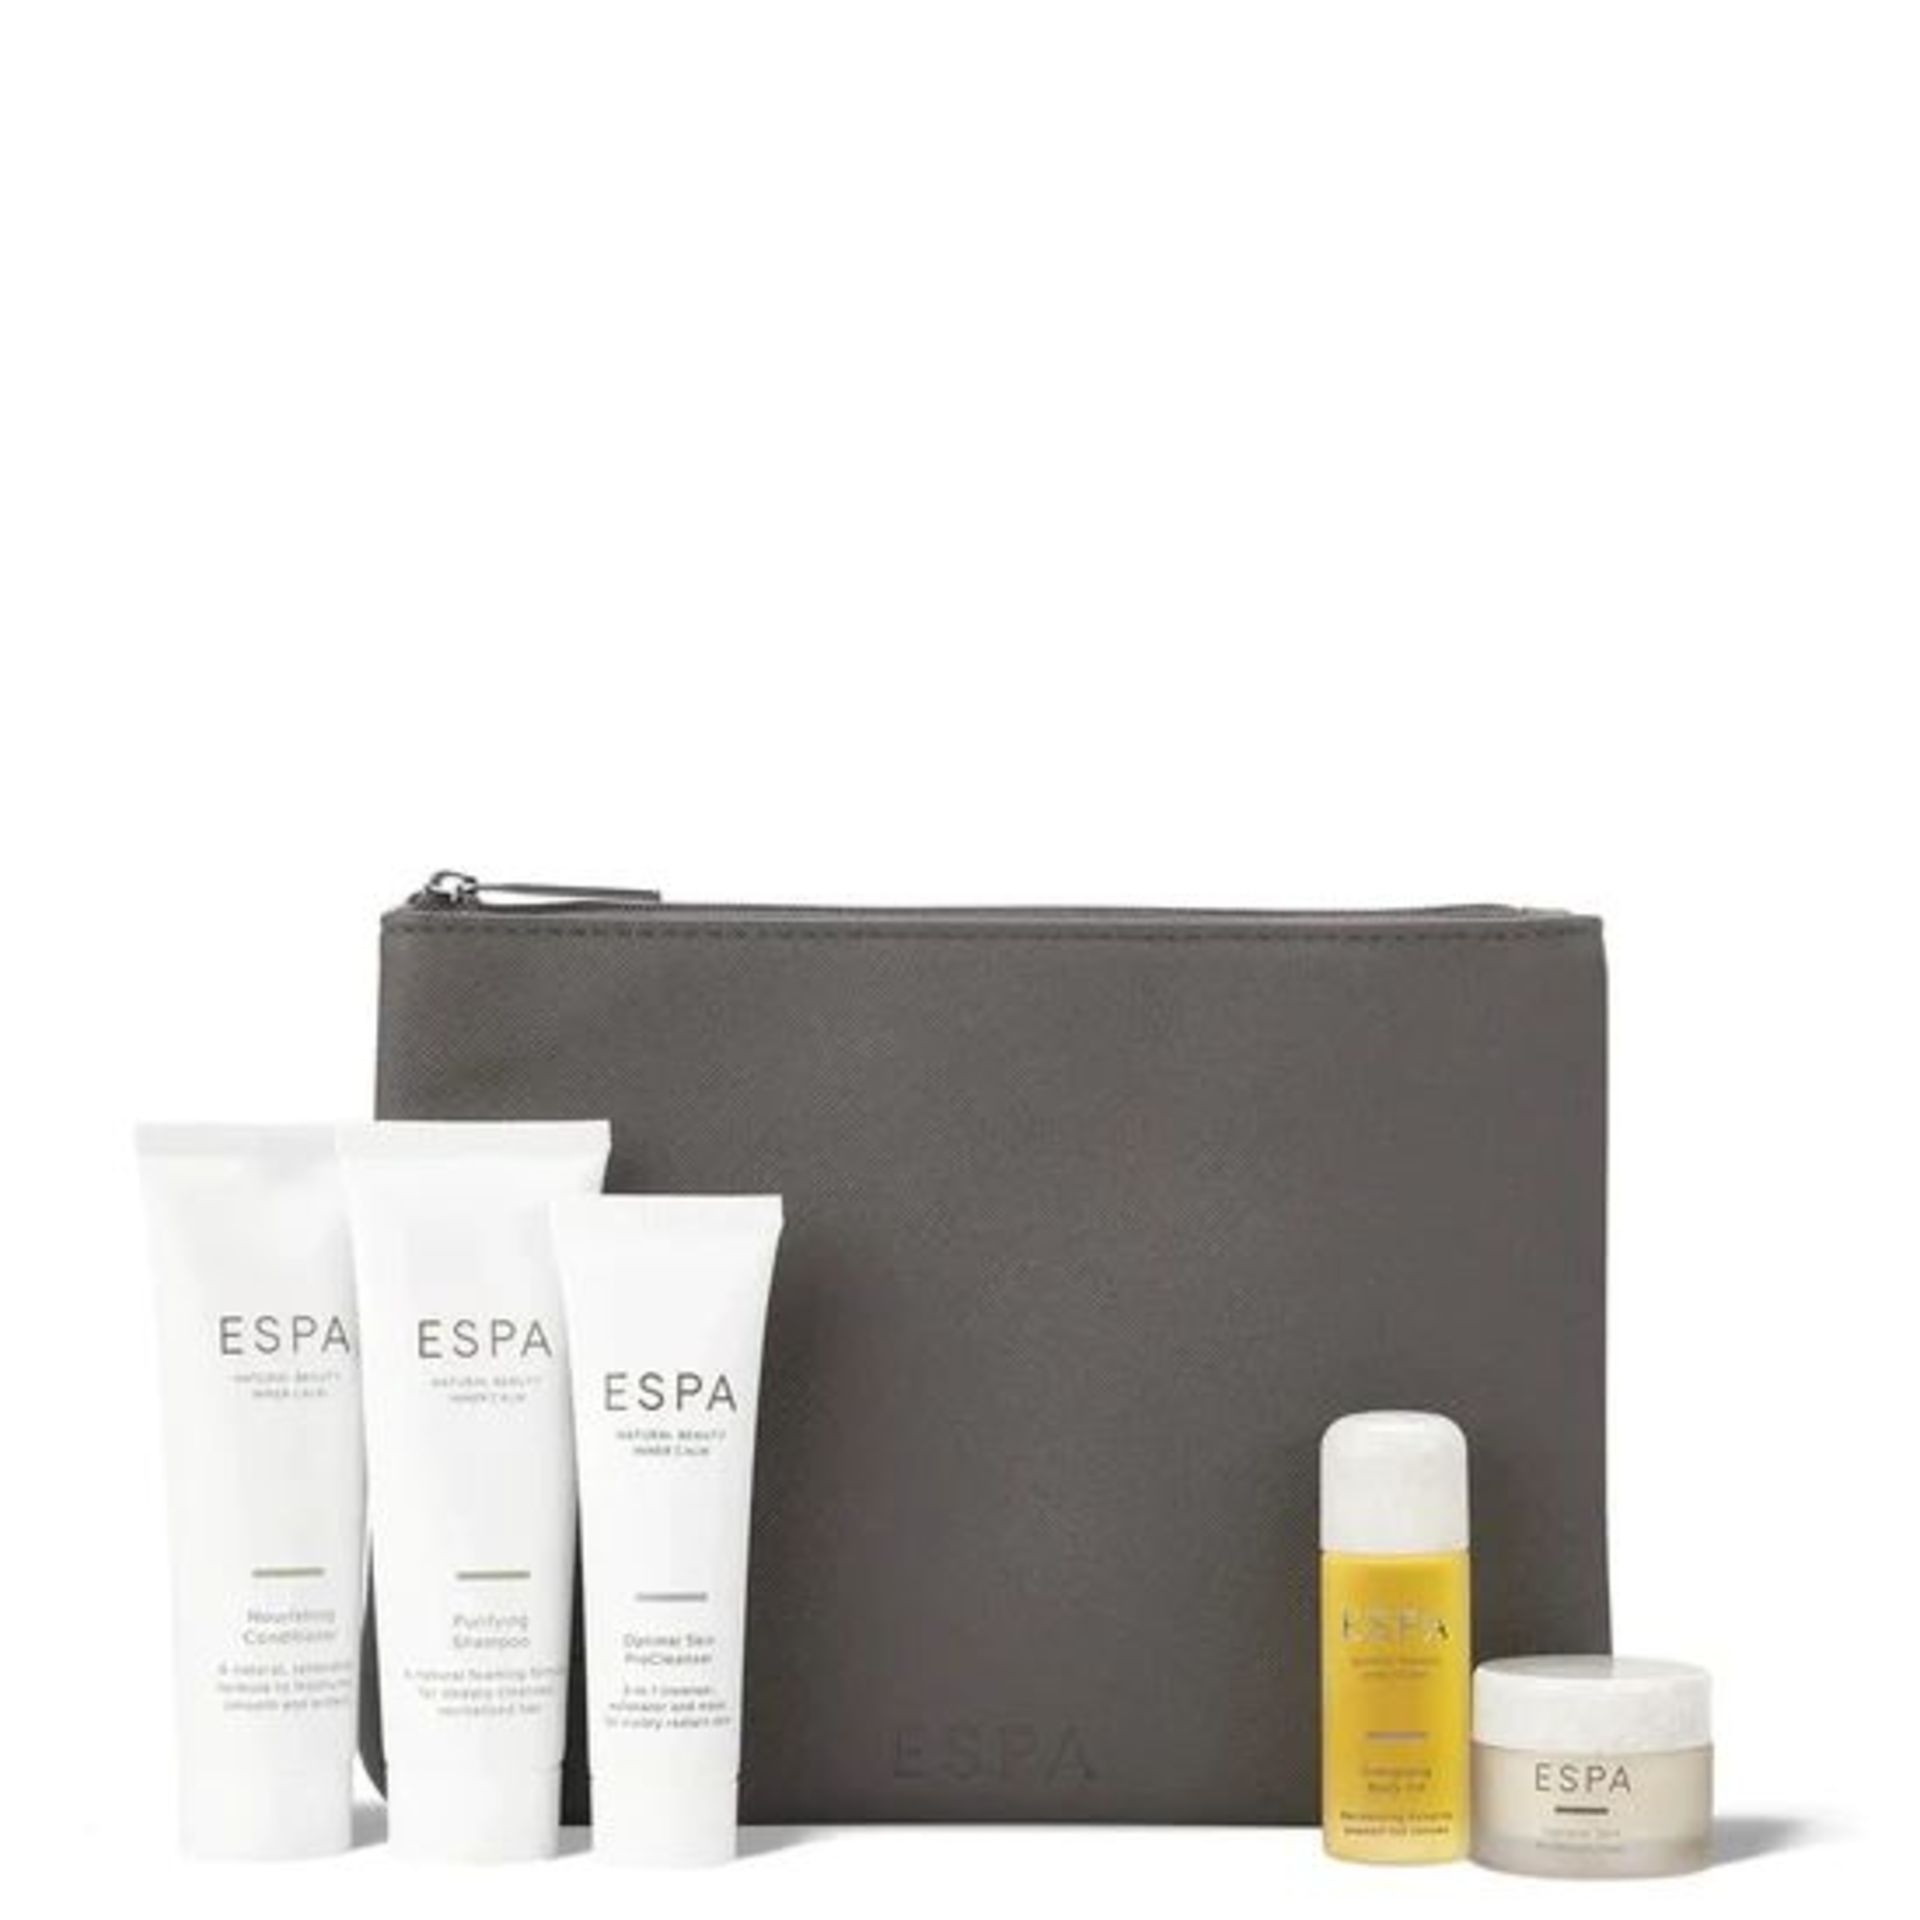 6x NEW ESPA Morning Ritual Collection Gift Set. RRP £45 Each. (EBR). UPLIFT your morning with